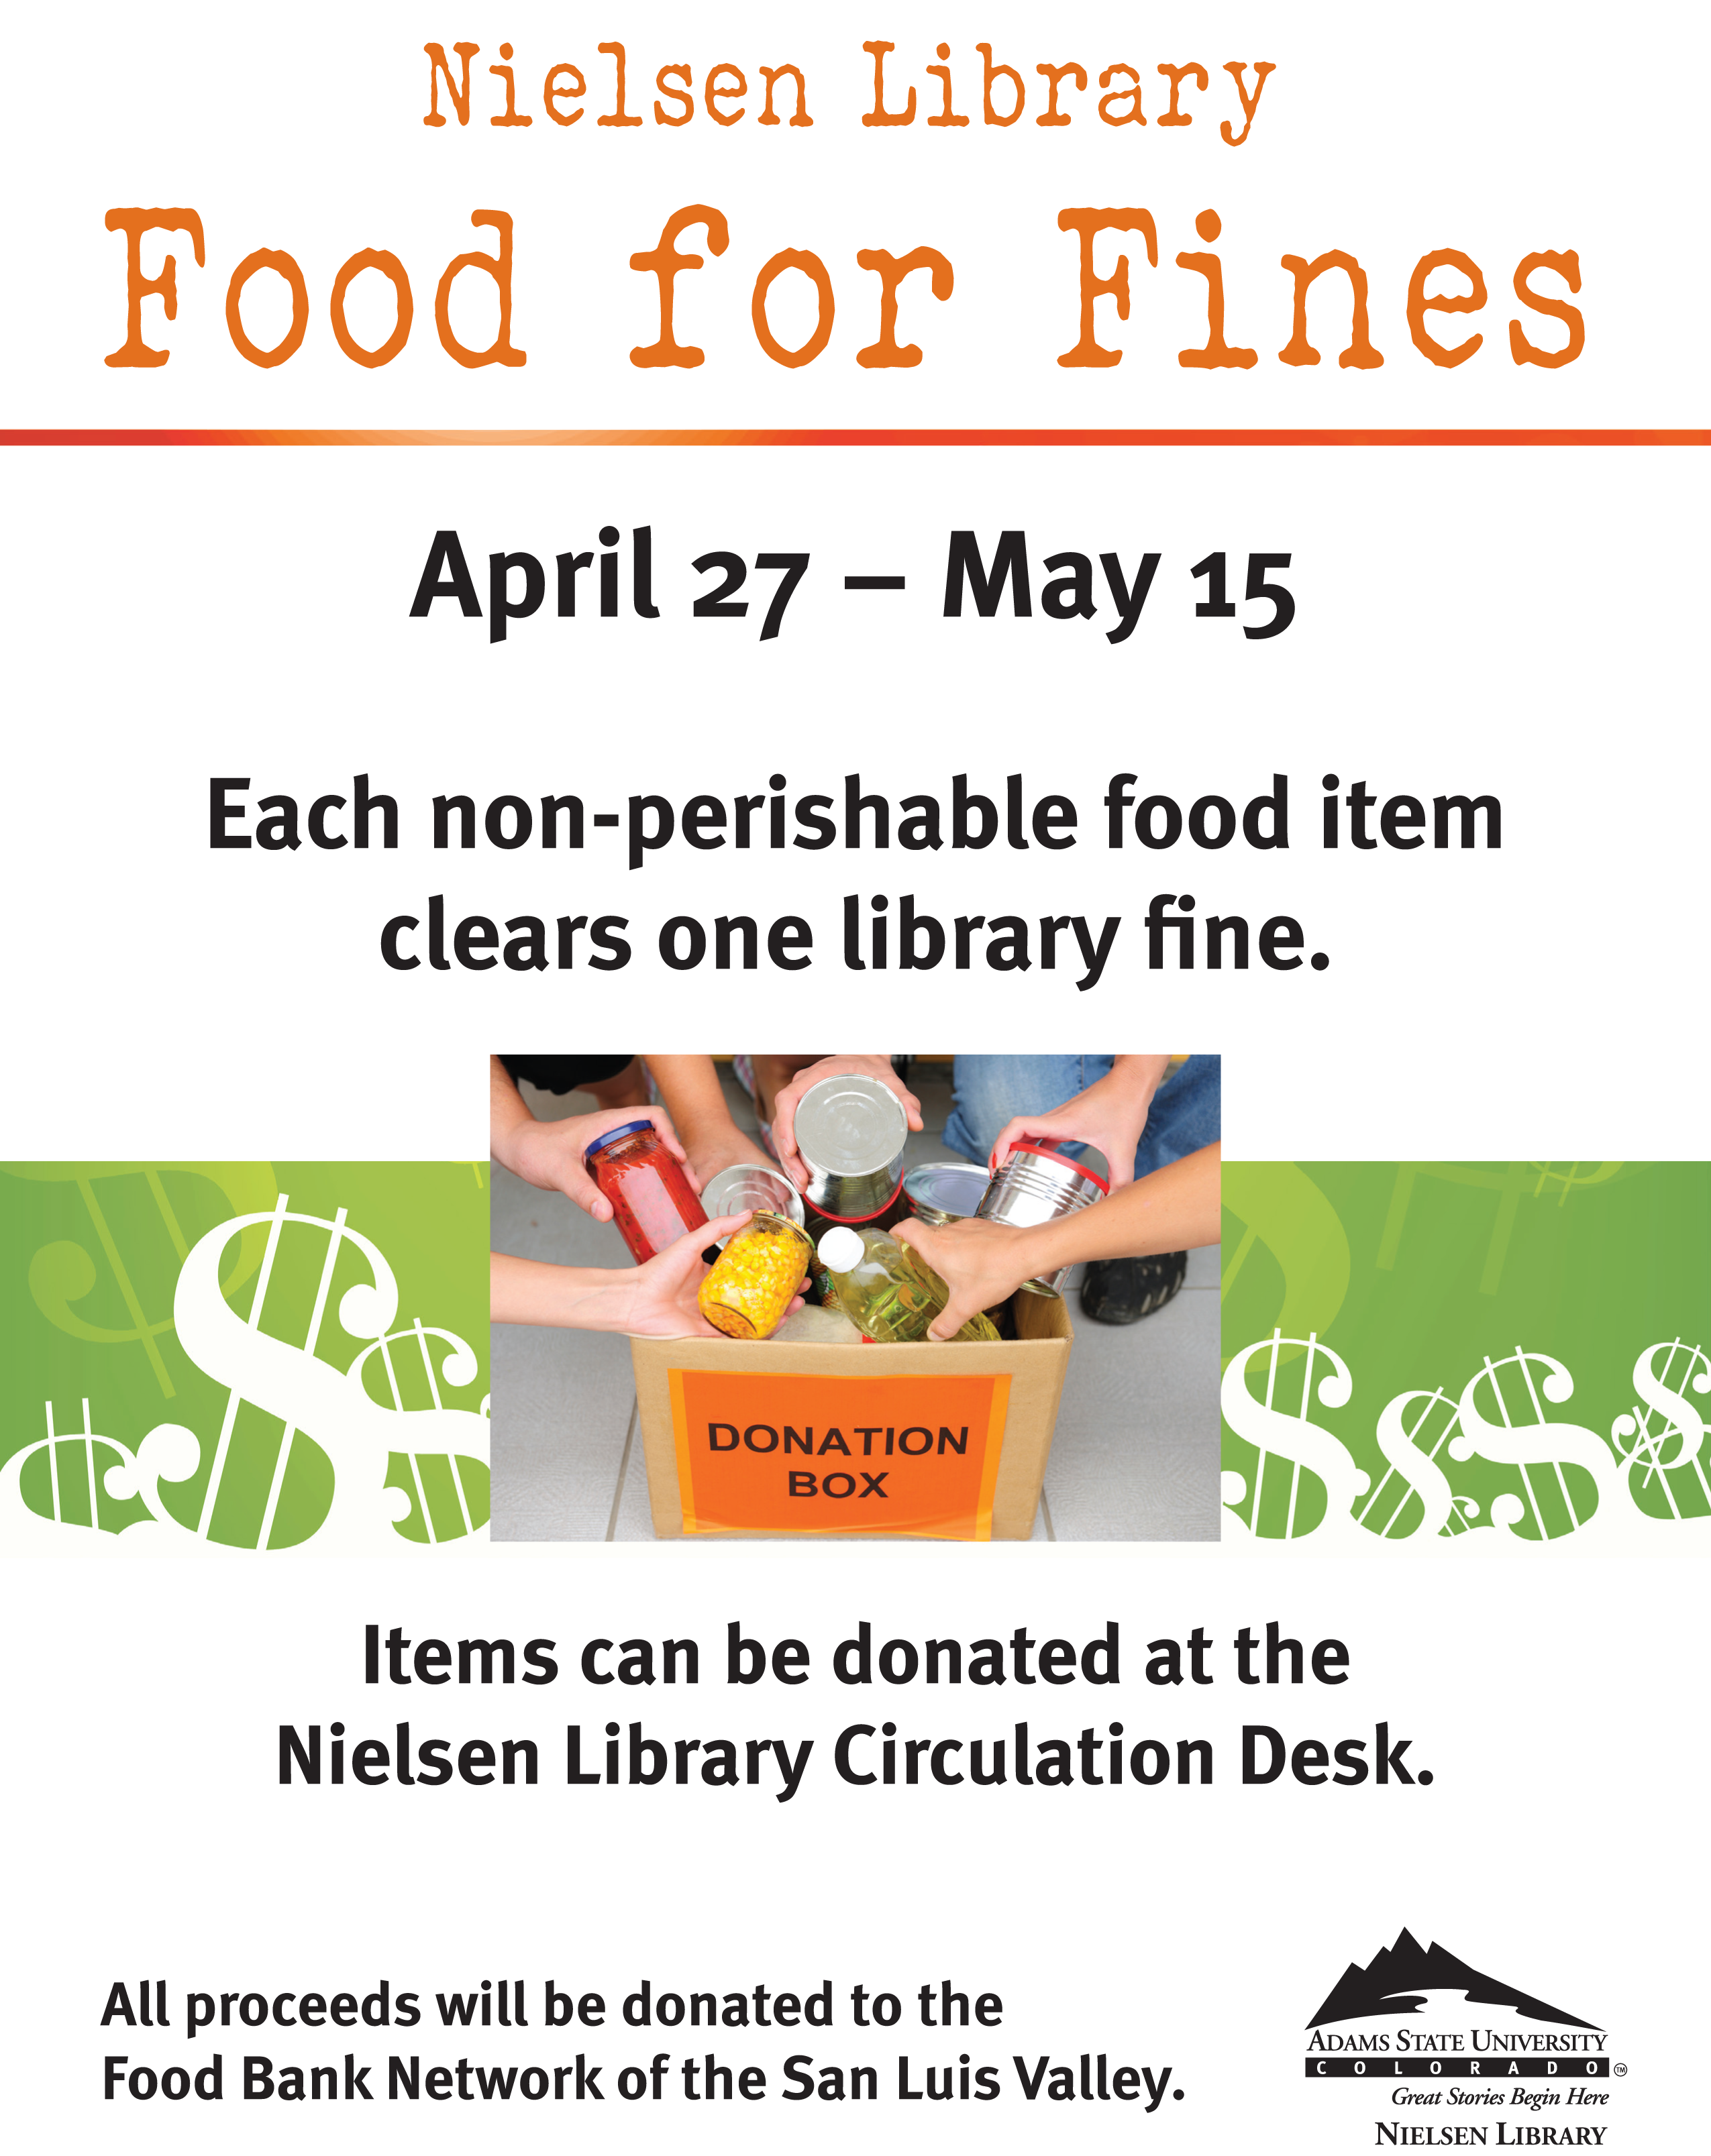 Food for Fines Flyer (1) copy